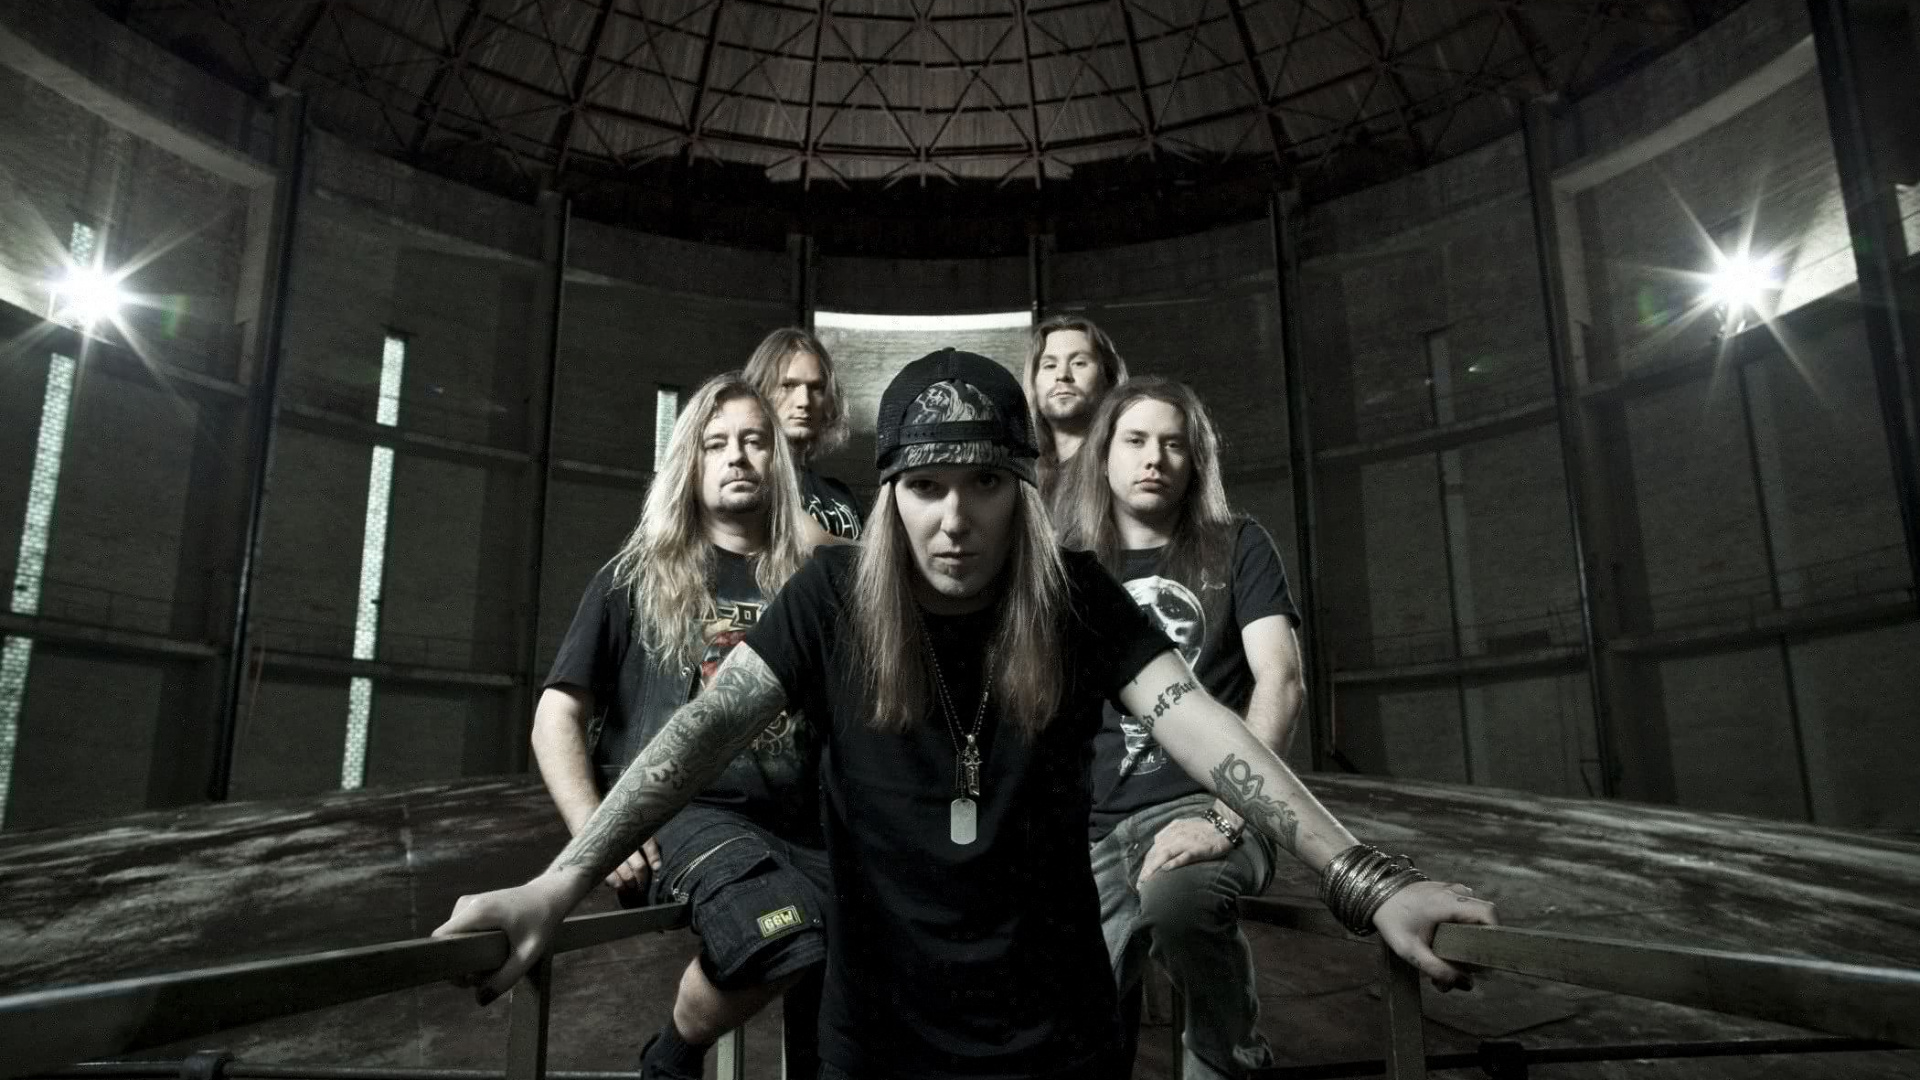 Children of Bodom, Alexi Laiho, Obscurité, Minuit. Wallpaper in 1920x1080 Resolution